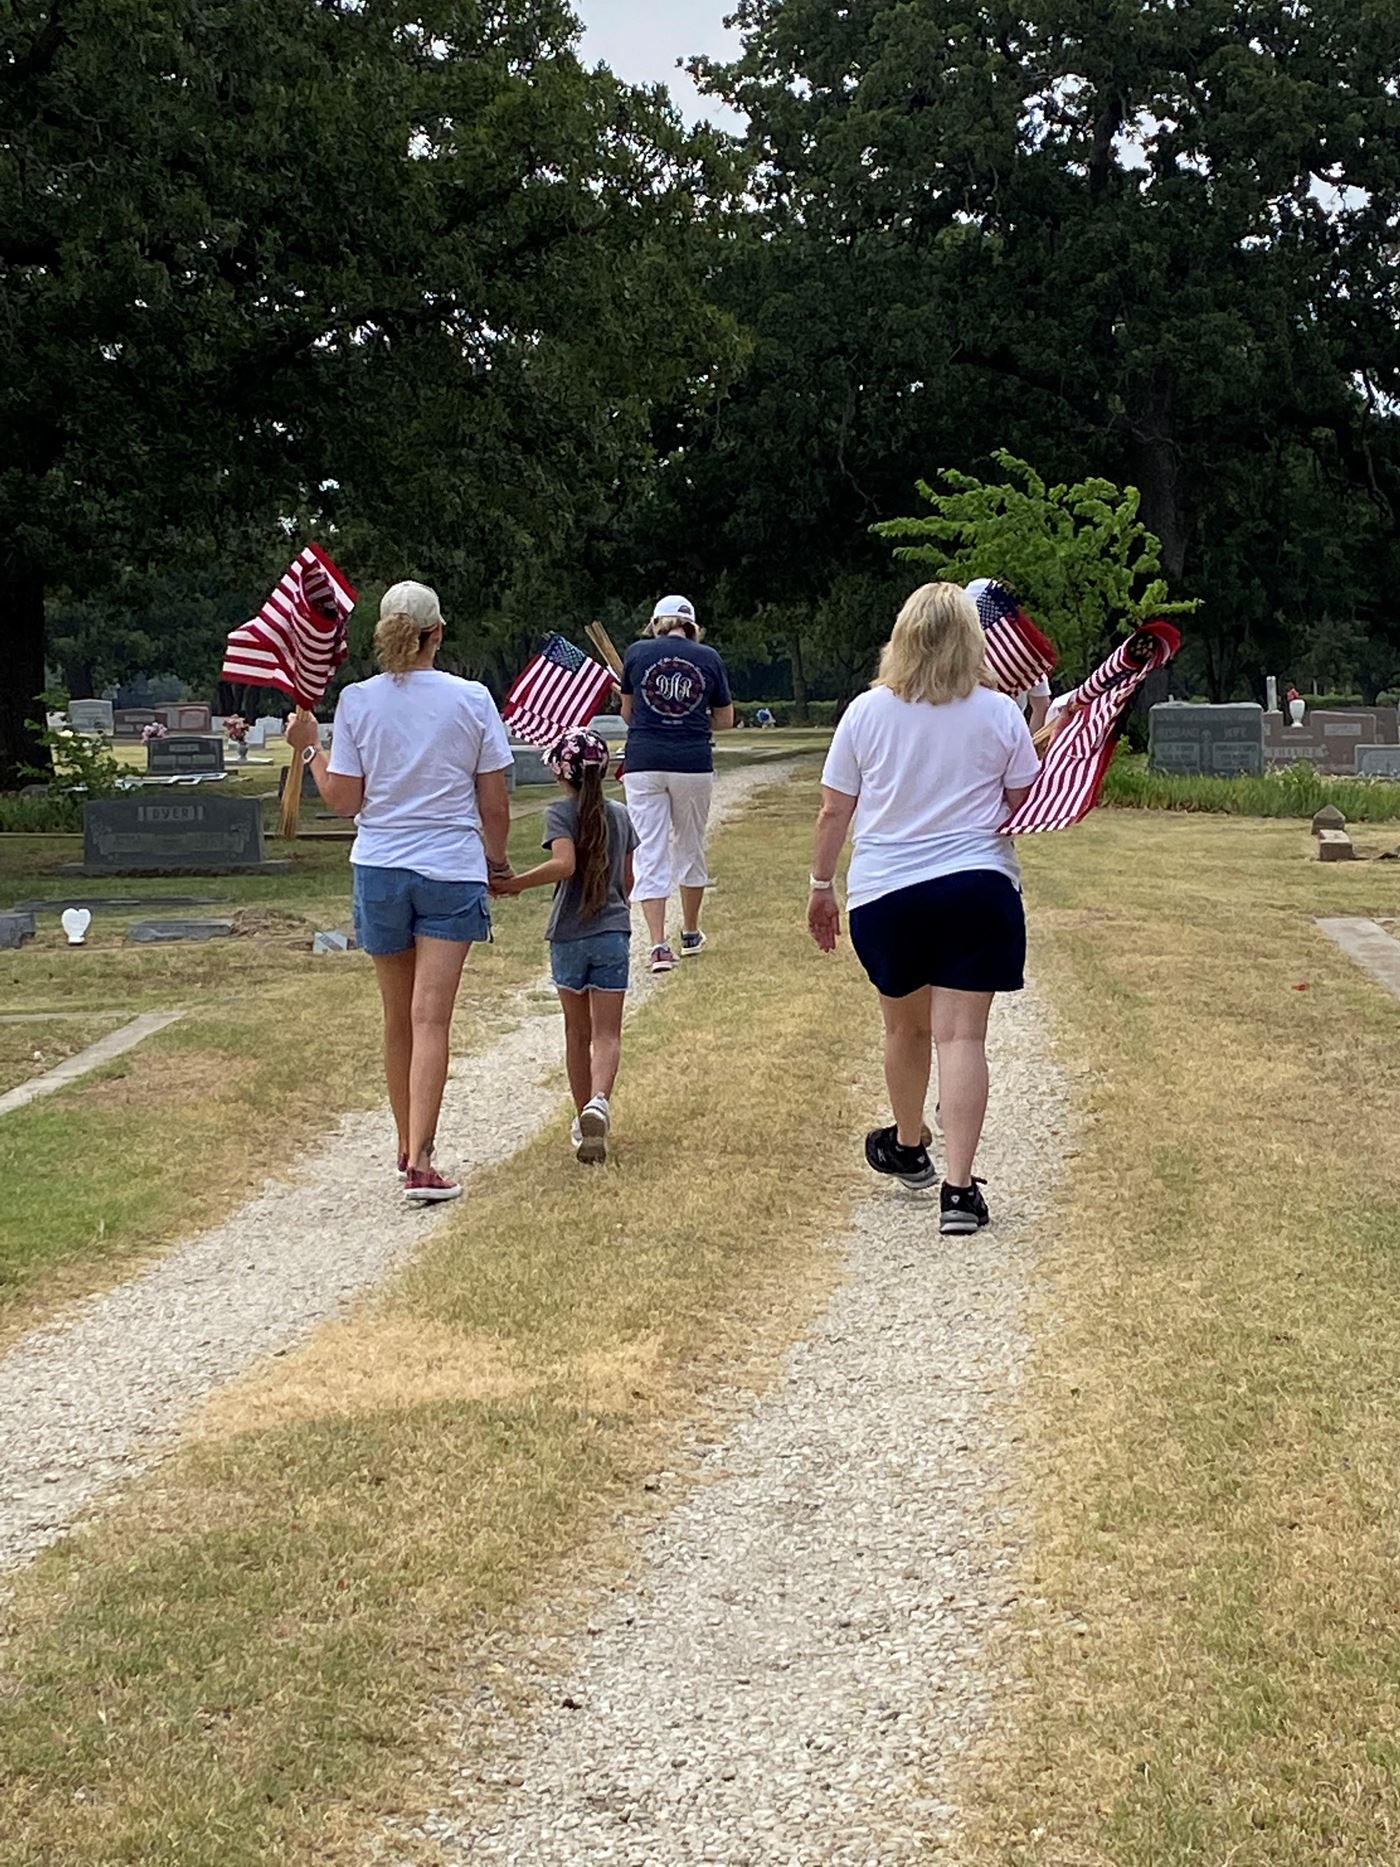 Members of The Flower Mound Chapter NSDAR and children on a mission to remember, honor and teach about the service and sacrifice of our local veterans by placing Memorial Day flags.